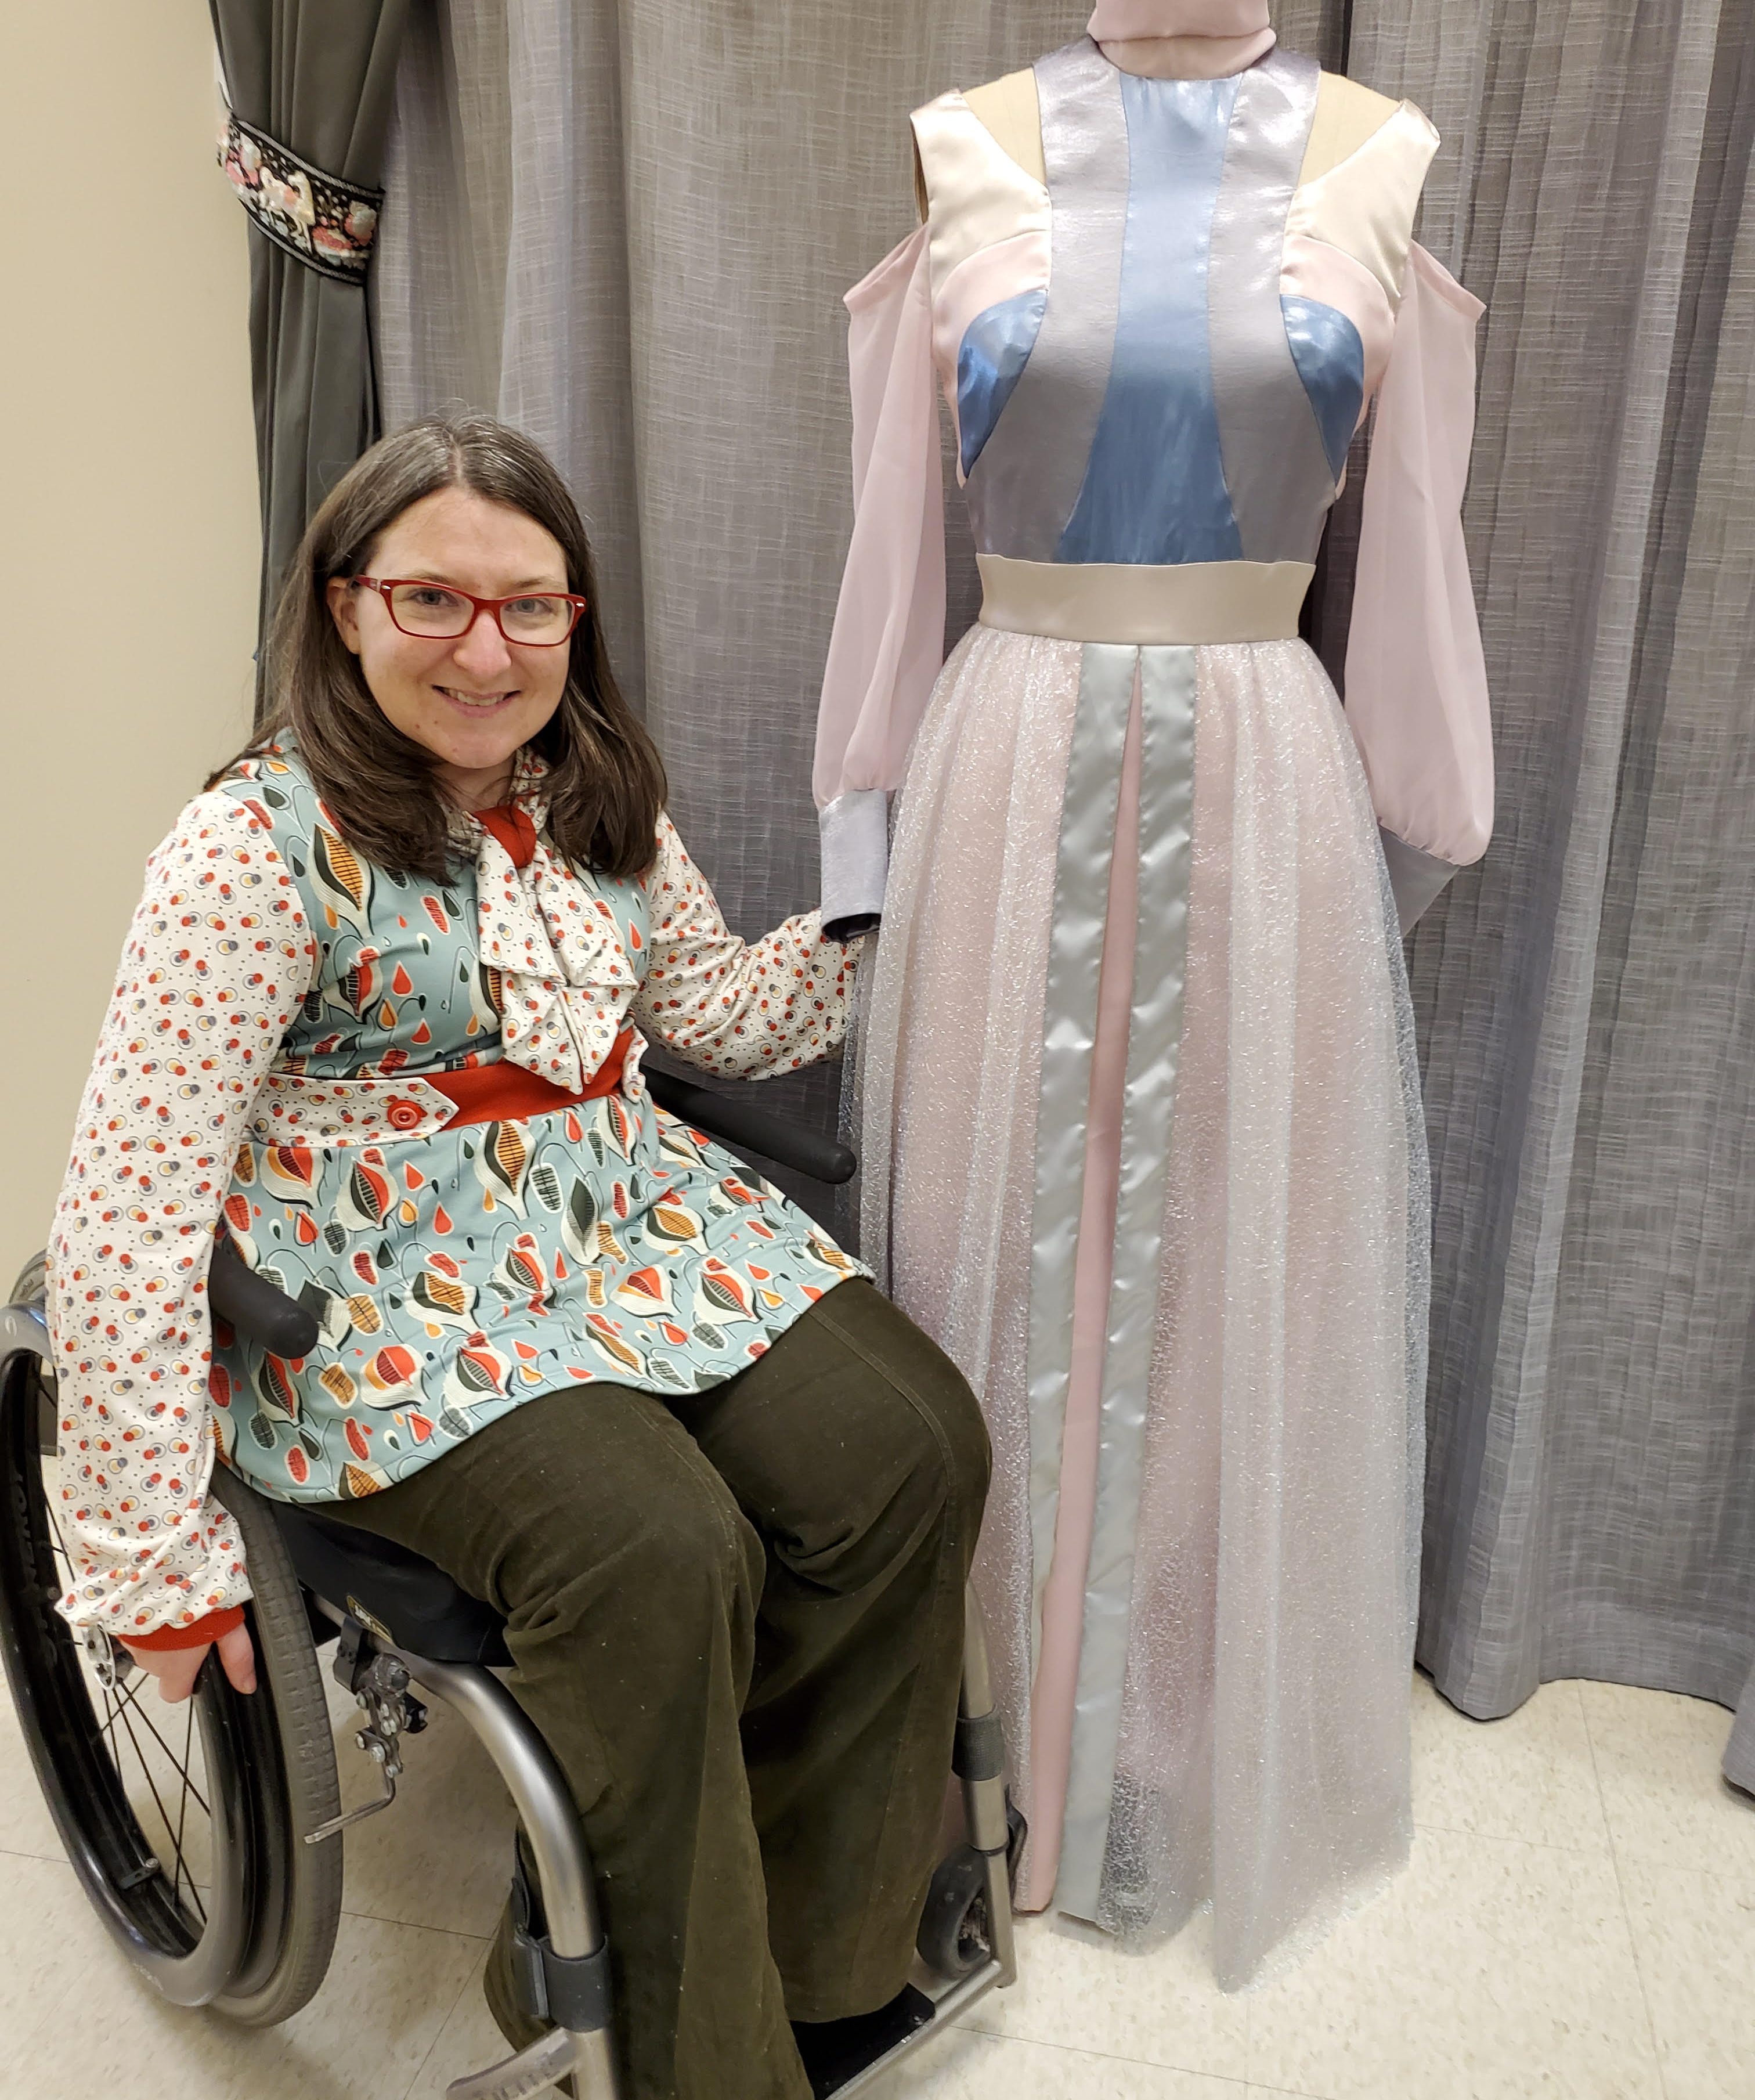 snapshot of Sarah LeFeber with one of her costume creations